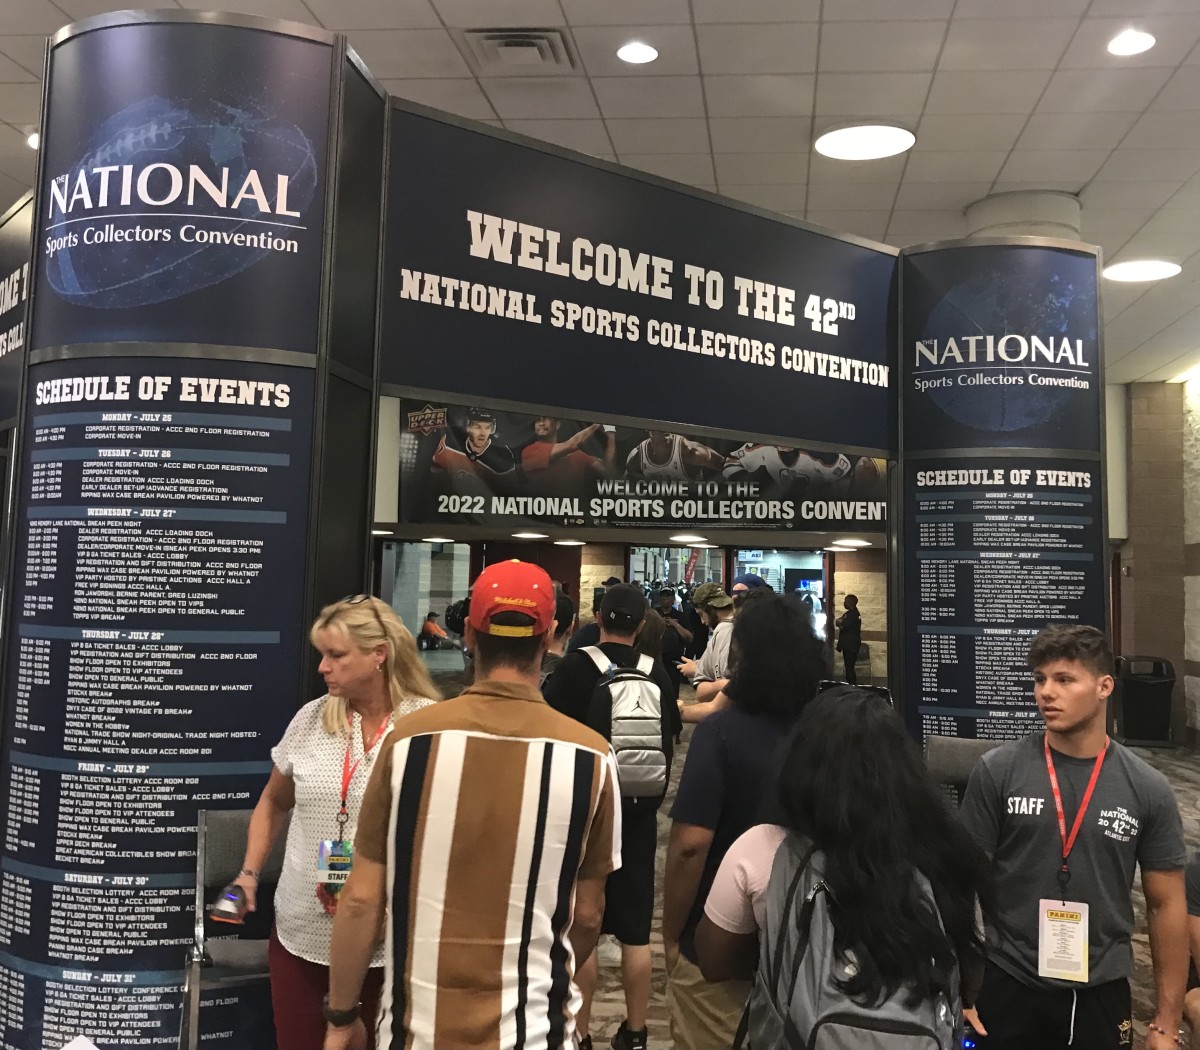 The entrance to the National Sports Collectors Convention in Atlantic City.